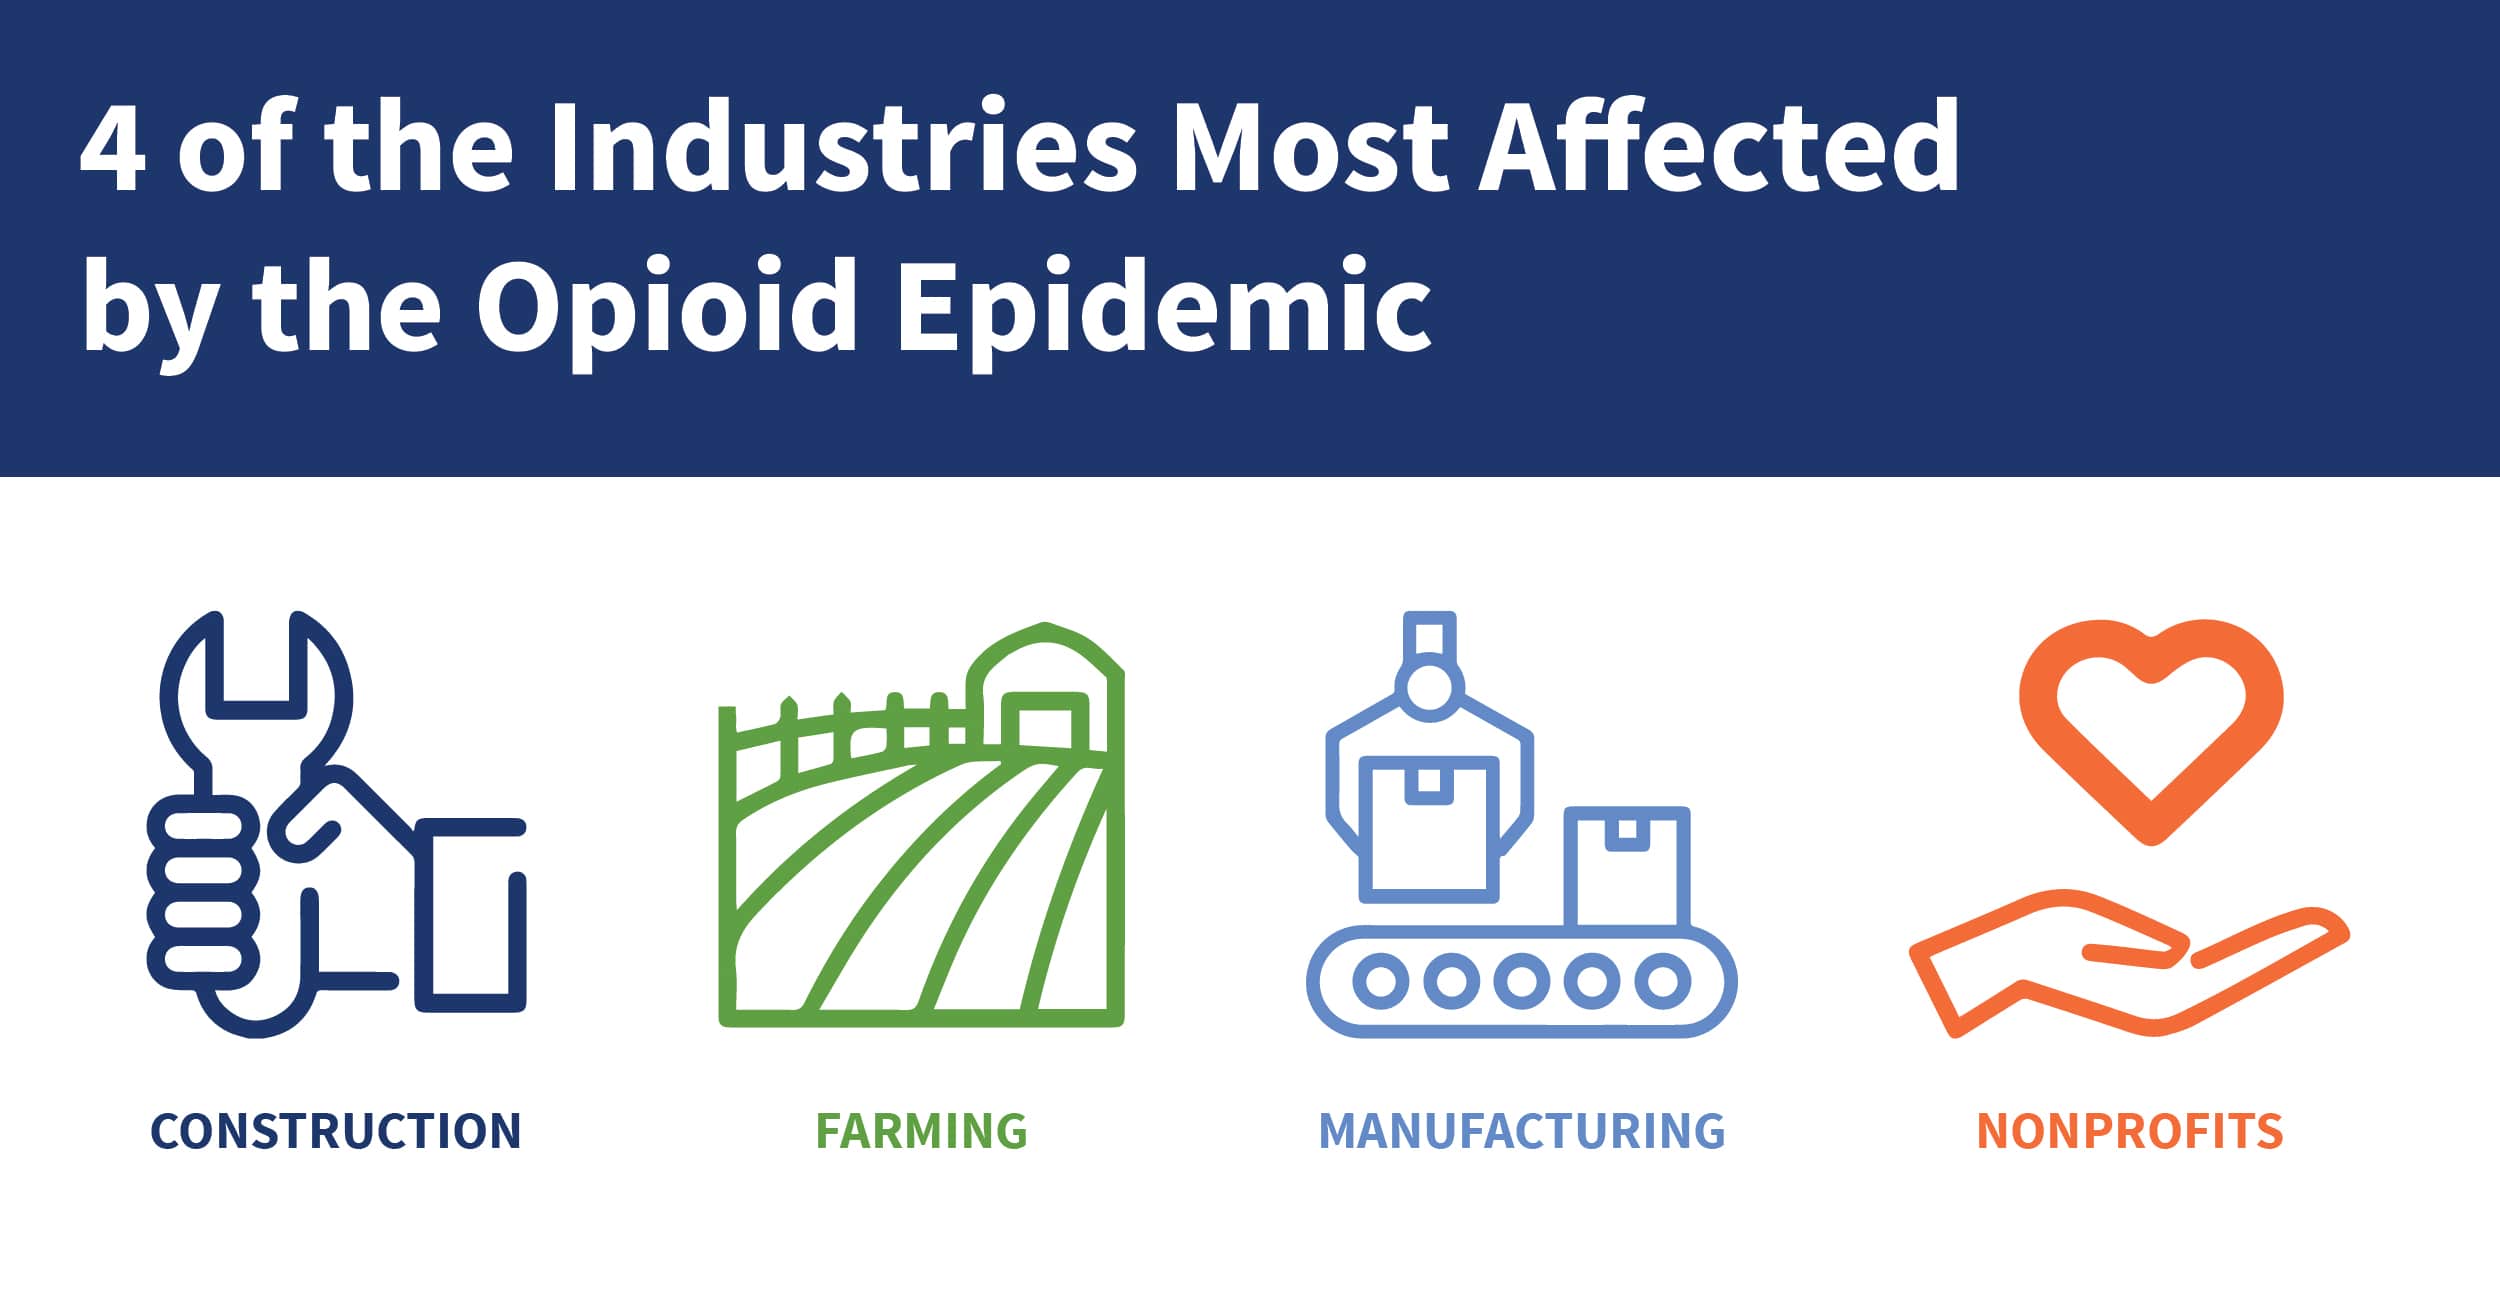 The Industries Most Affected by the Opioid Epidemic